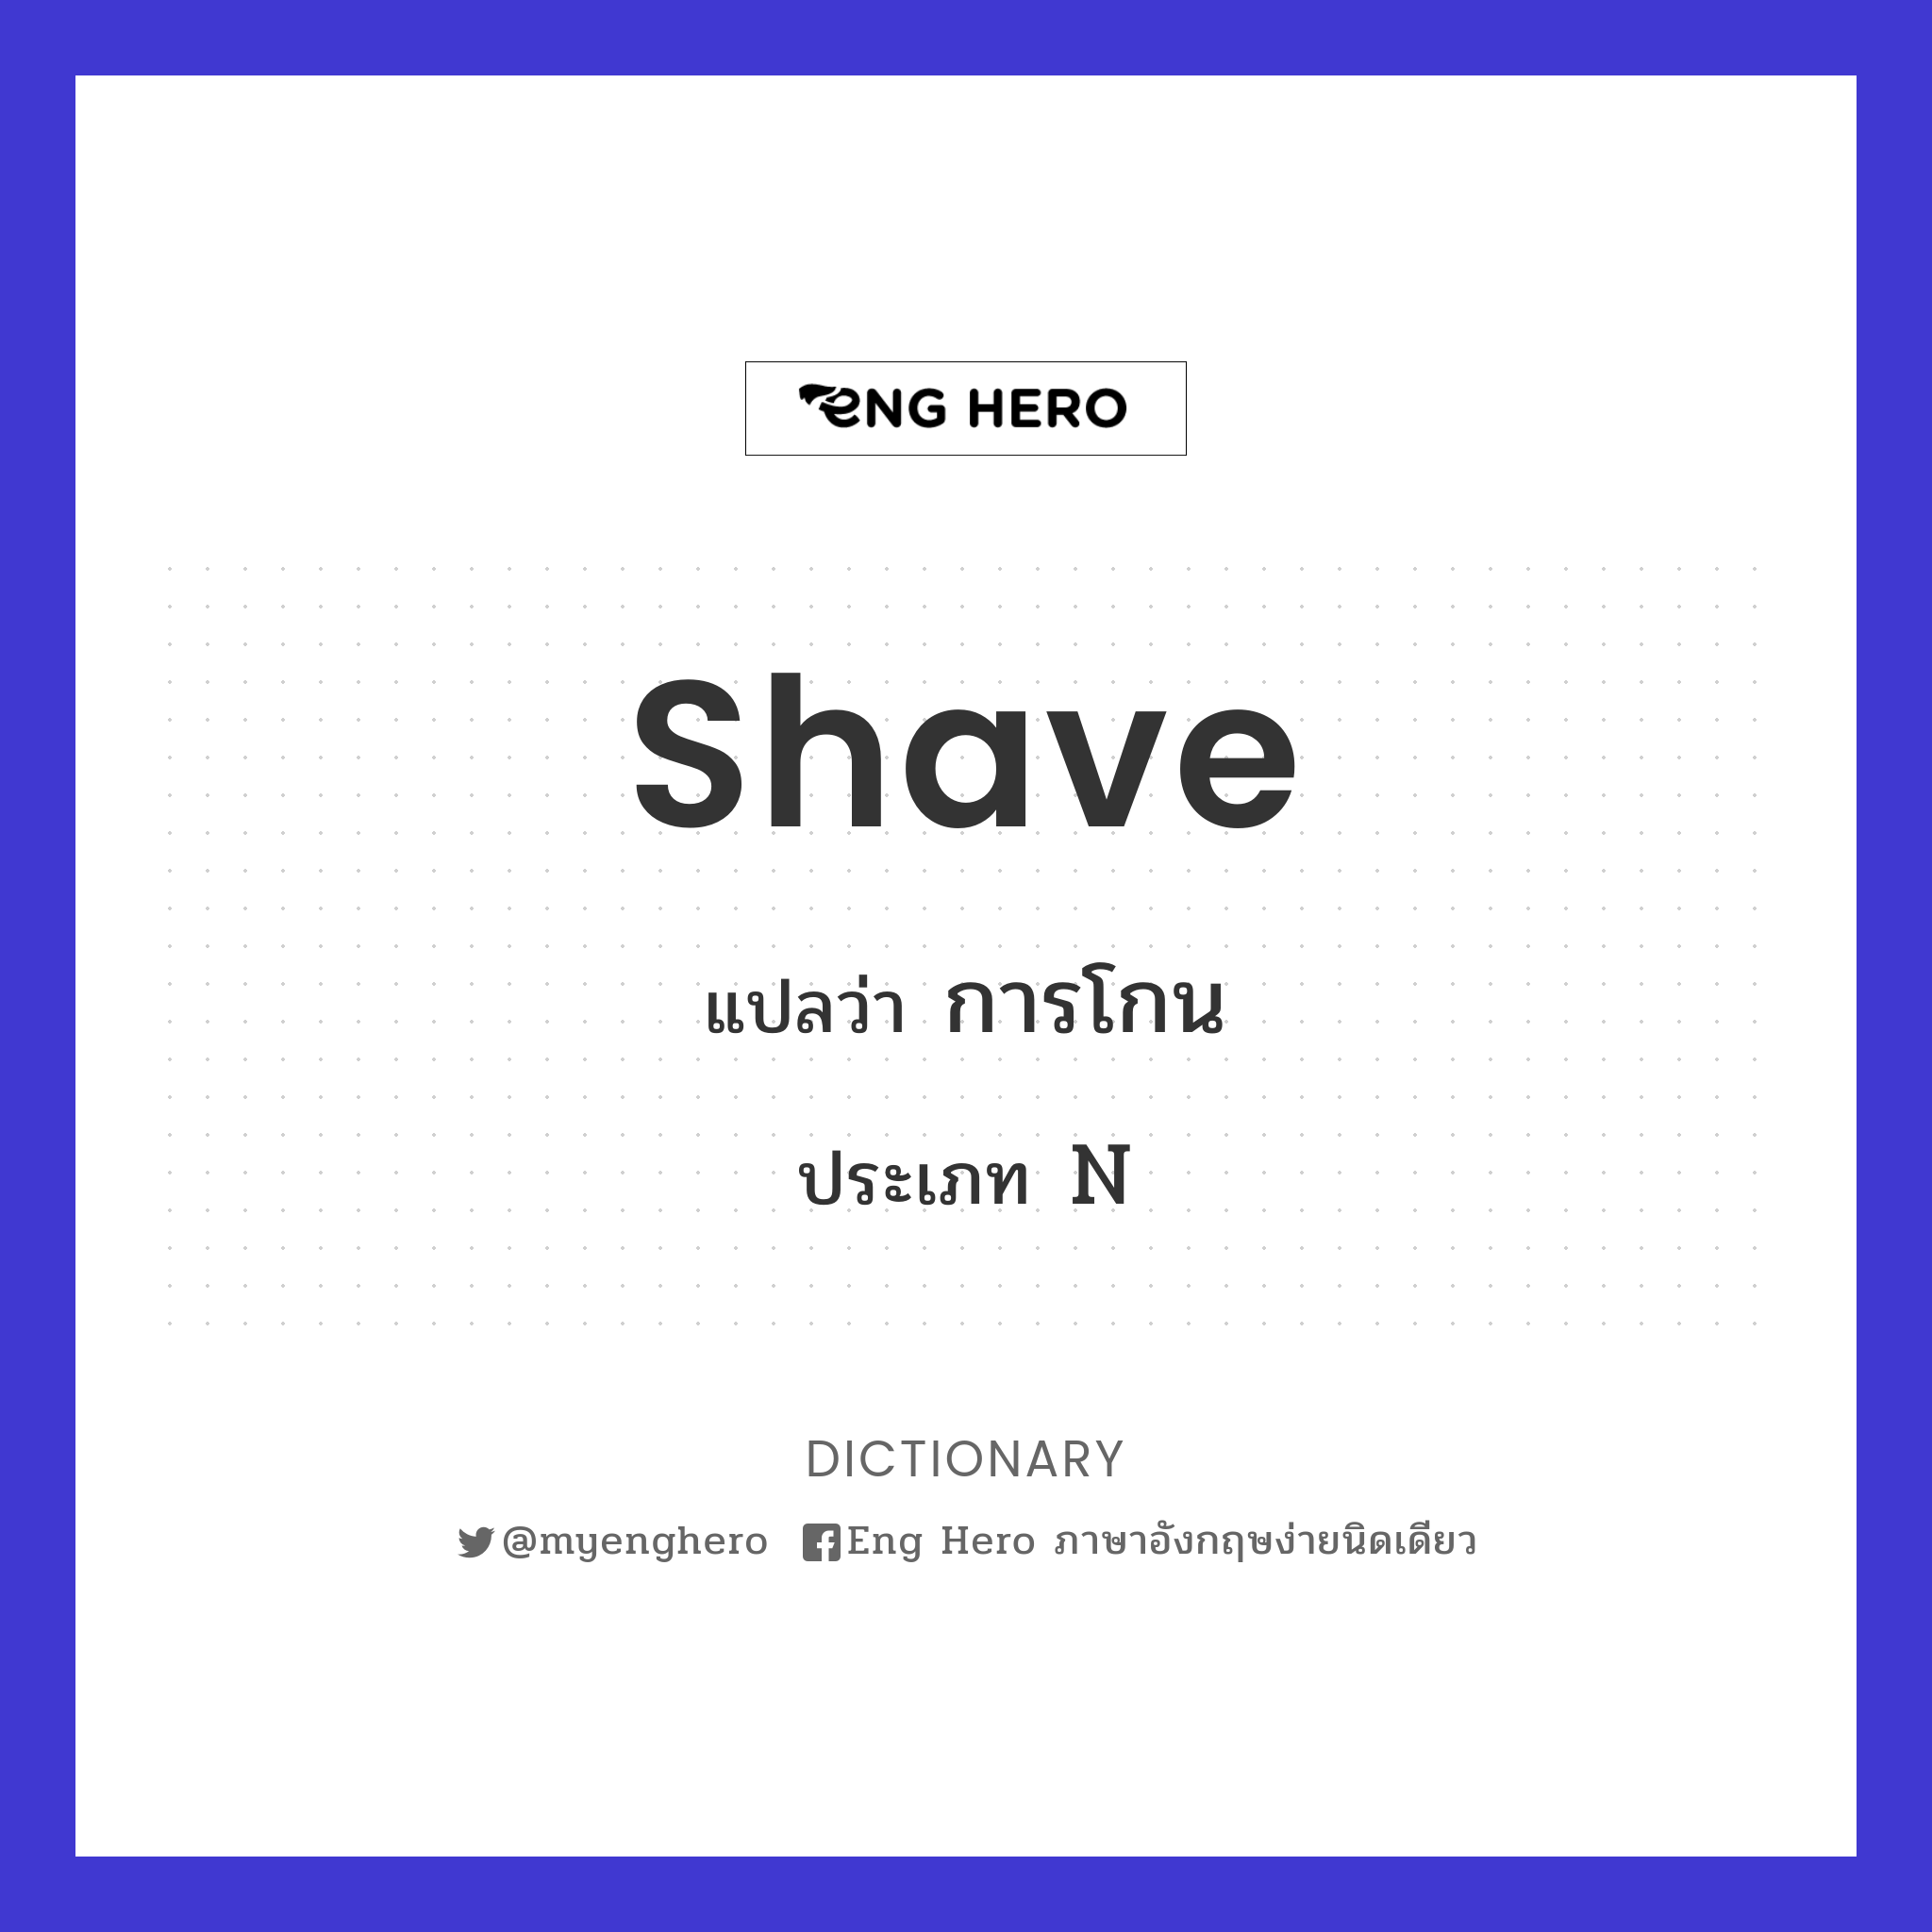 shave